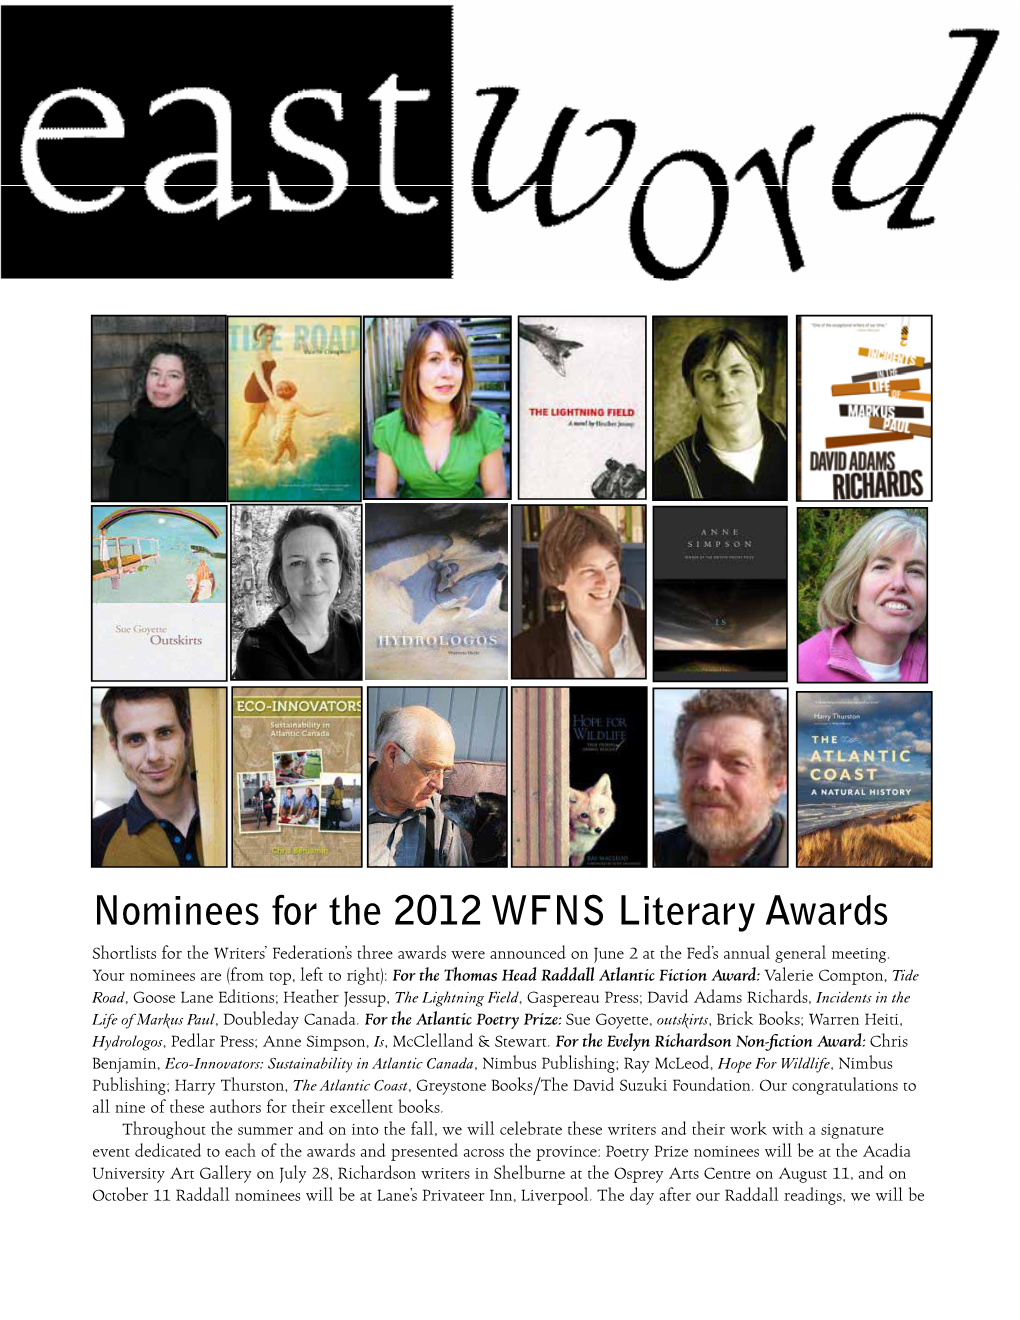 Nominees for the 2012 WFNS Literary Awards Shortlists for the Writers’ Federation’S Three Awards Were Announced on June 2 at the Fed’S Annual General Meeting